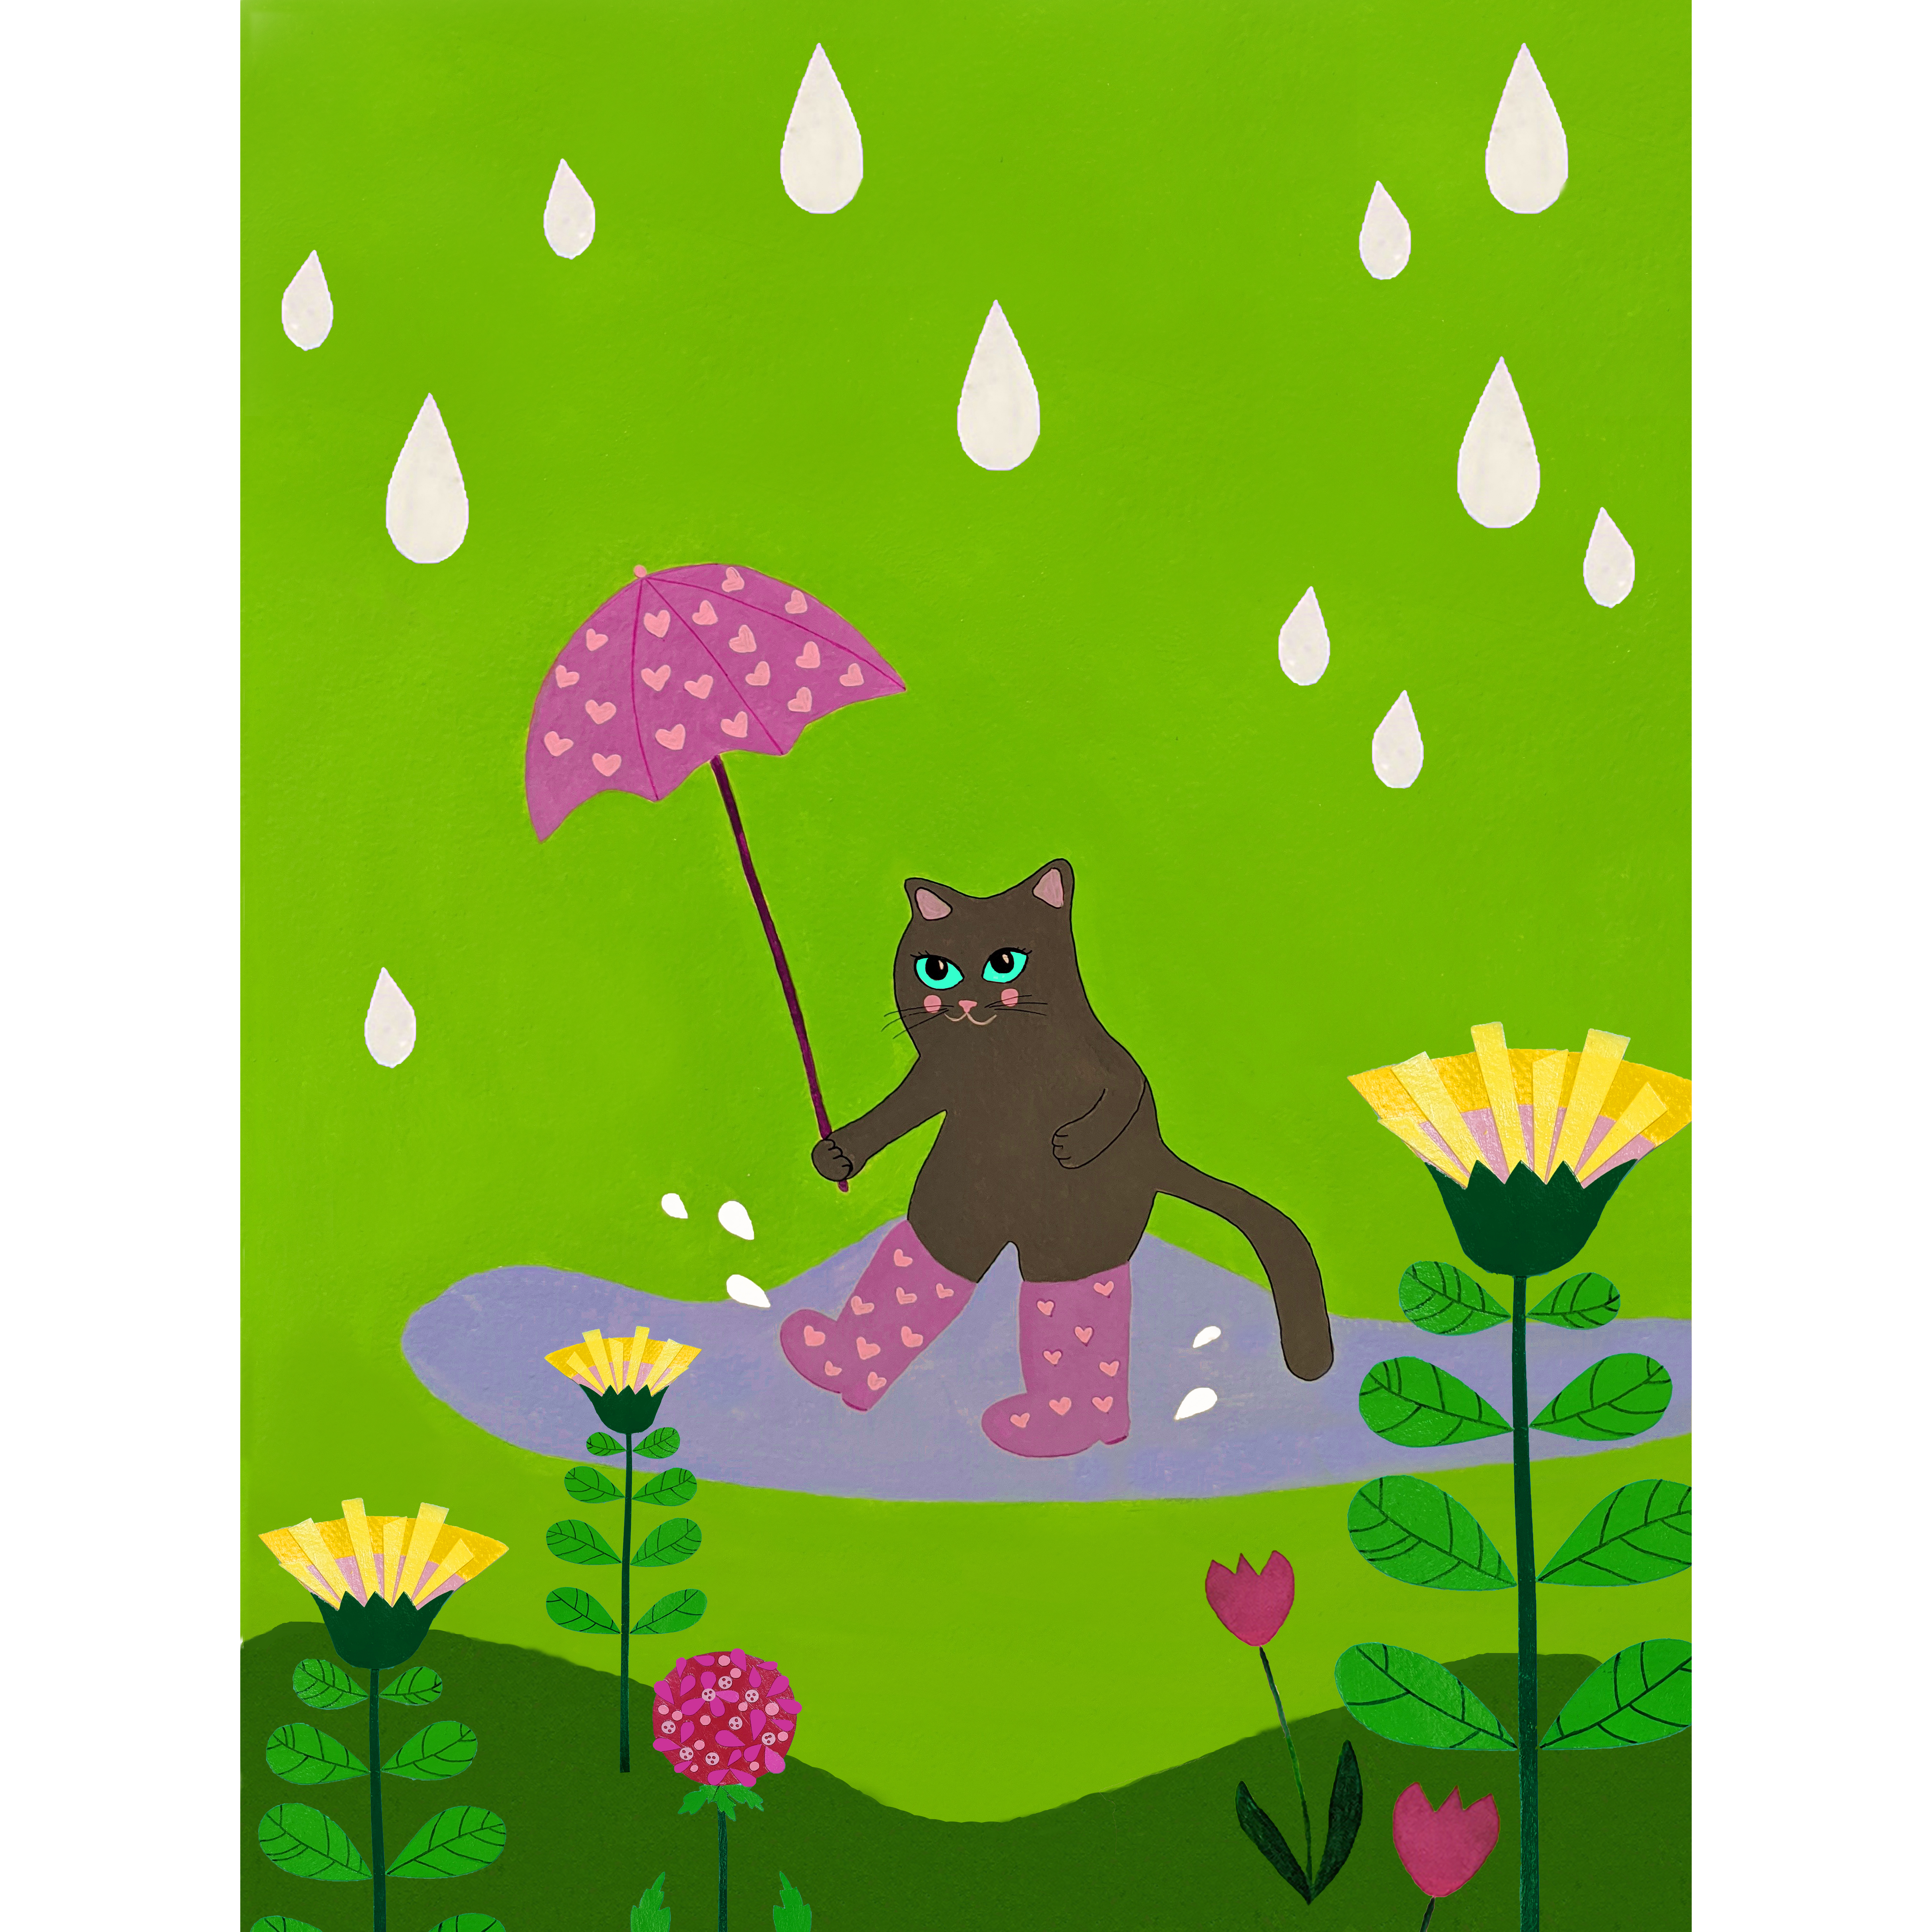 kitten cat in rain colorful and whimsical nursery wall illustration art print by Laura Lynne